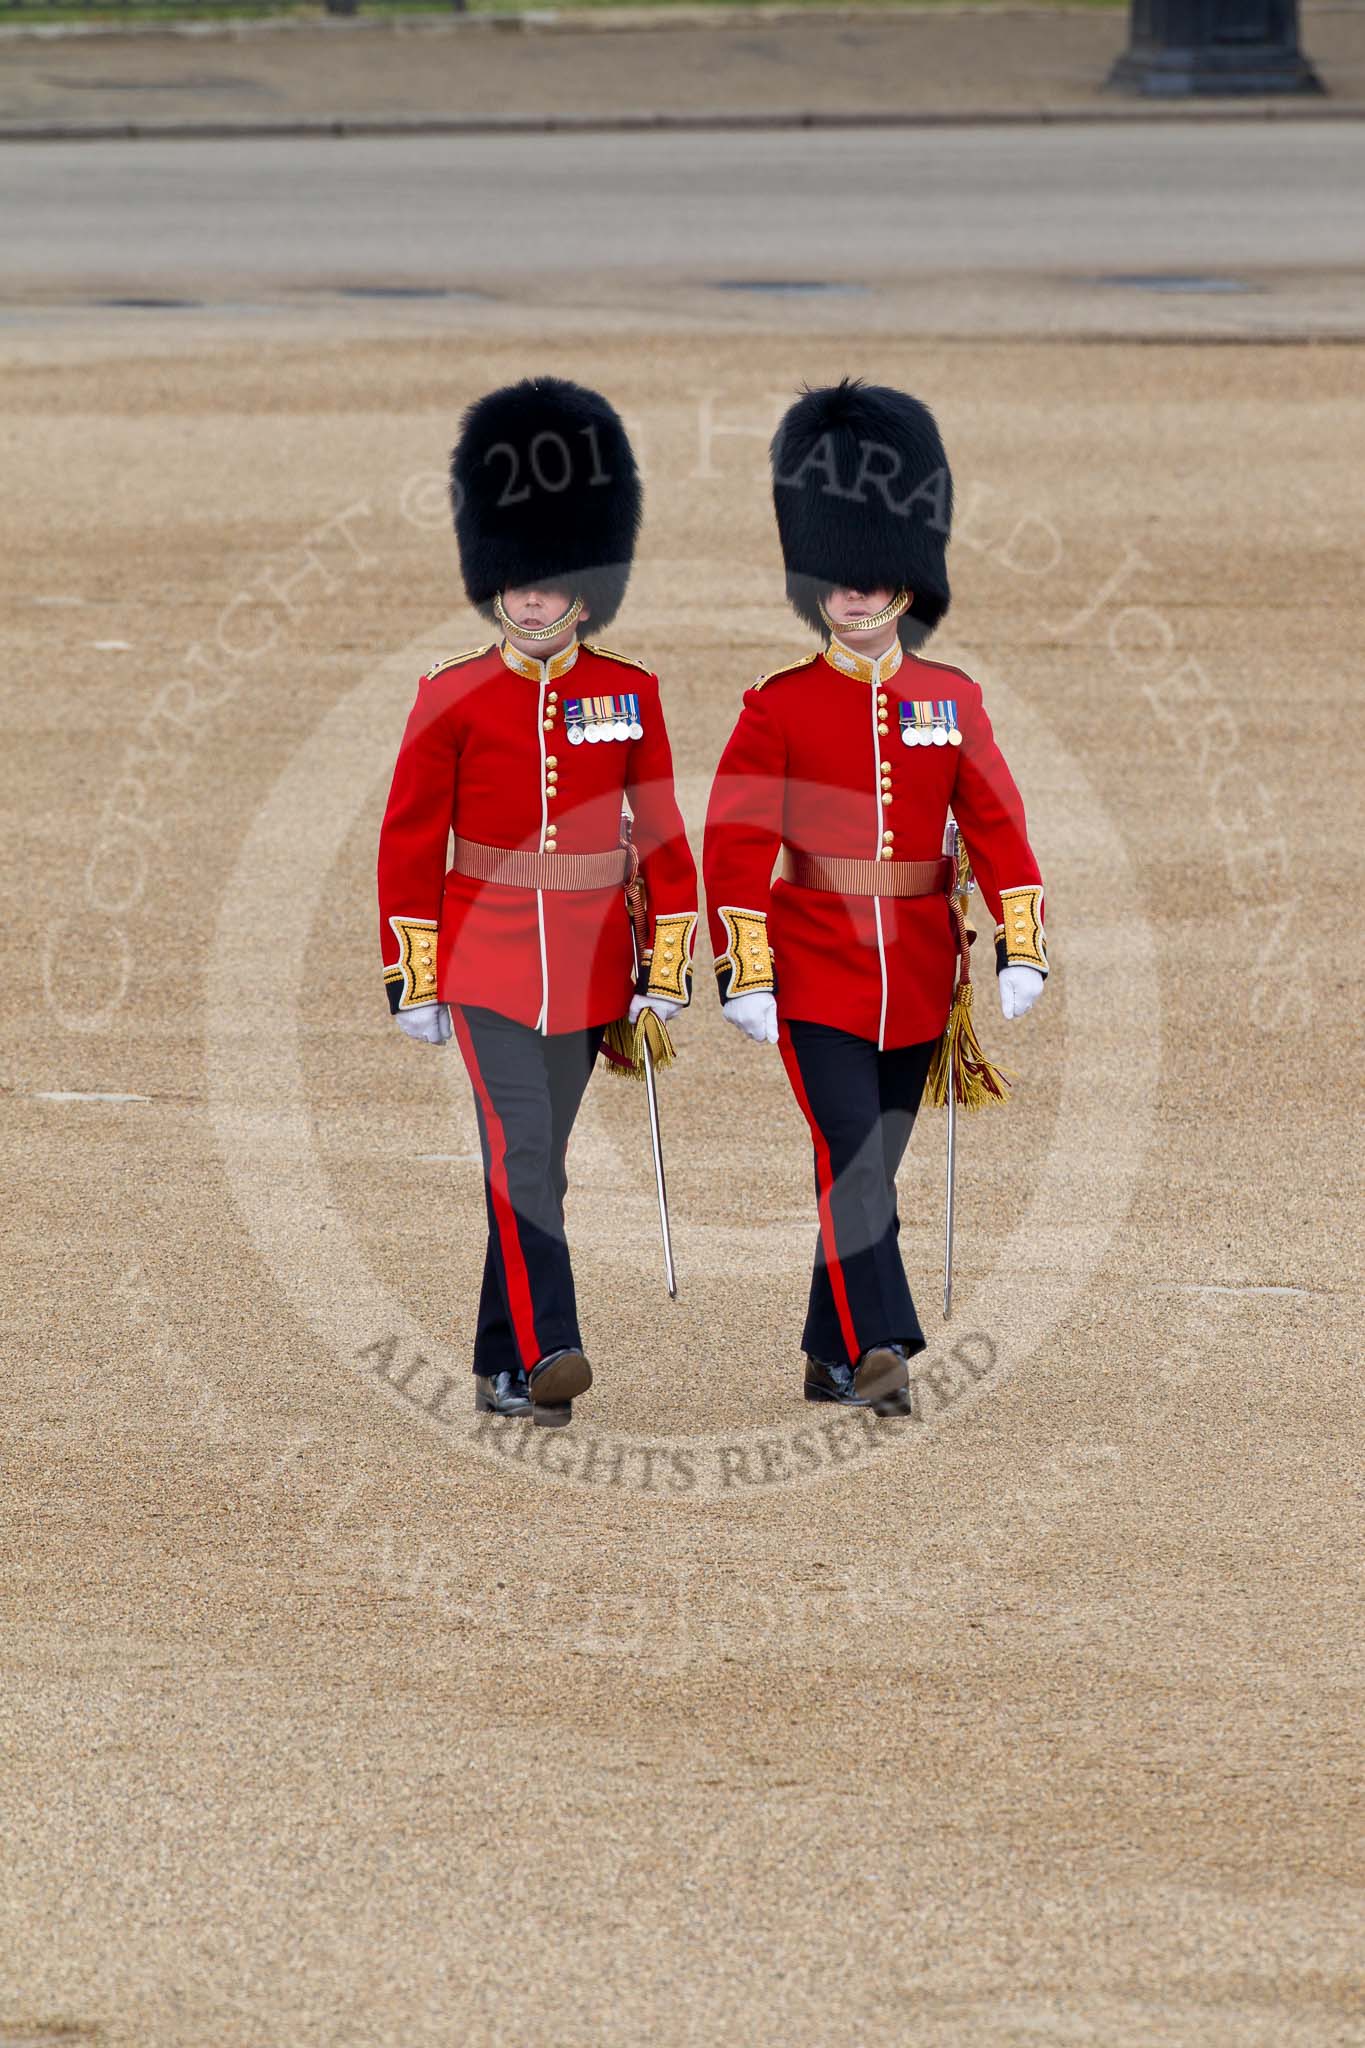 Trooping the Colour 2011: Subaltern and Ensign from the Scots Guards, crossing Horse Guards Parade from the the position of their guard towards Horse Guards Arch..
Horse Guards Parade, Westminster,
London SW1,
Greater London,
United Kingdom,
on 11 June 2011 at 09:53, image #6